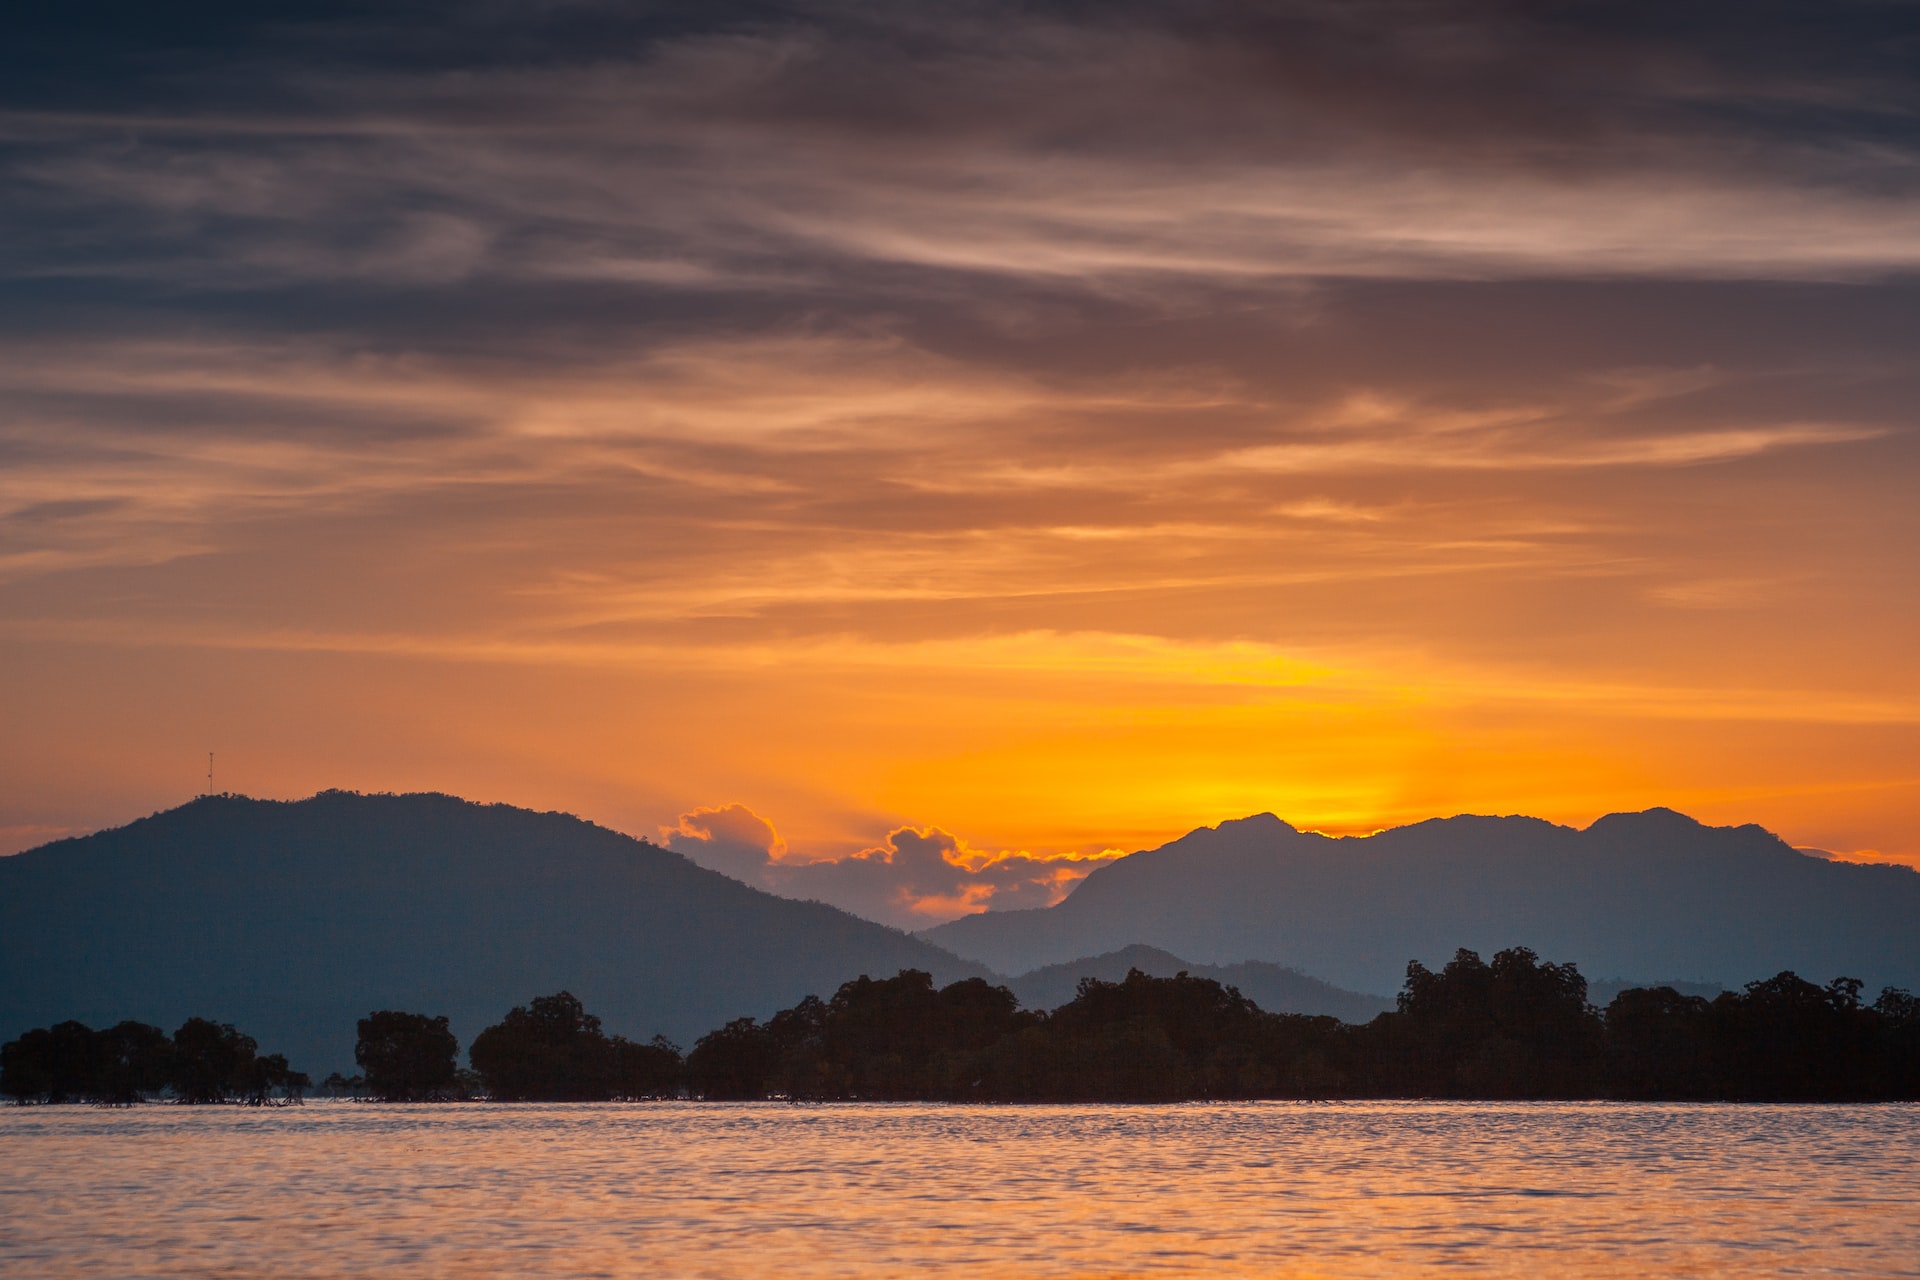 A sun sets serenely behind distant mountains overlooking a lake.